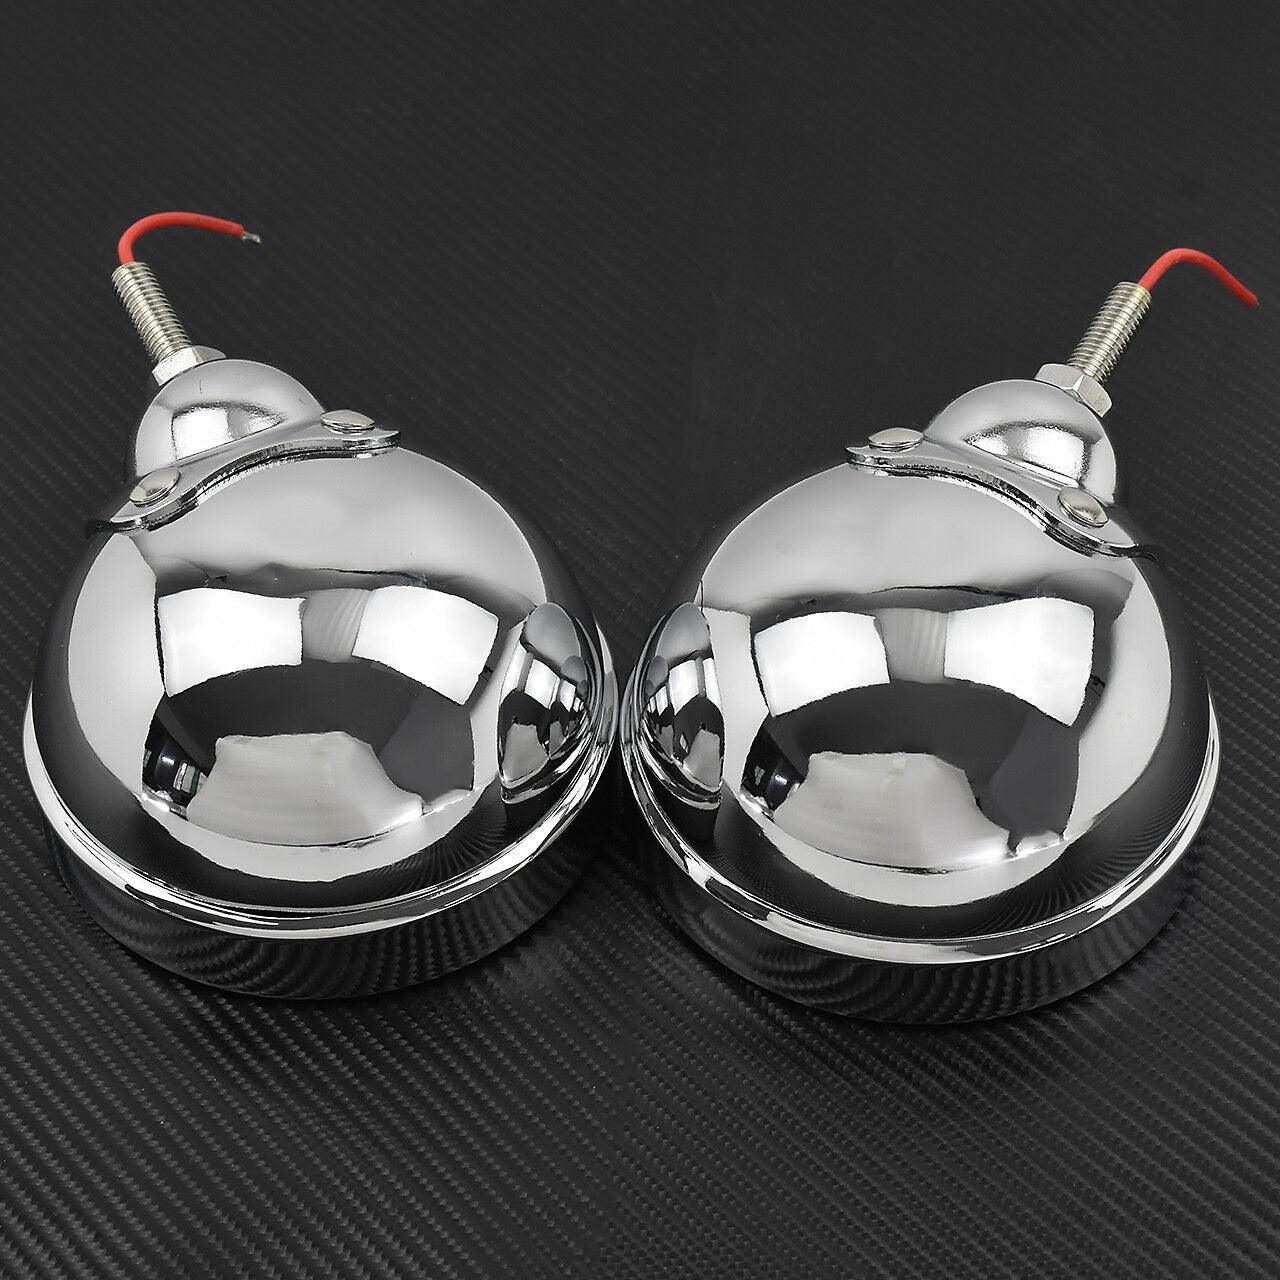 2x 4.5" Housing Fog Light Mounting Bracket Fit For Harley Touring Softail Chrome - Moto Life Products